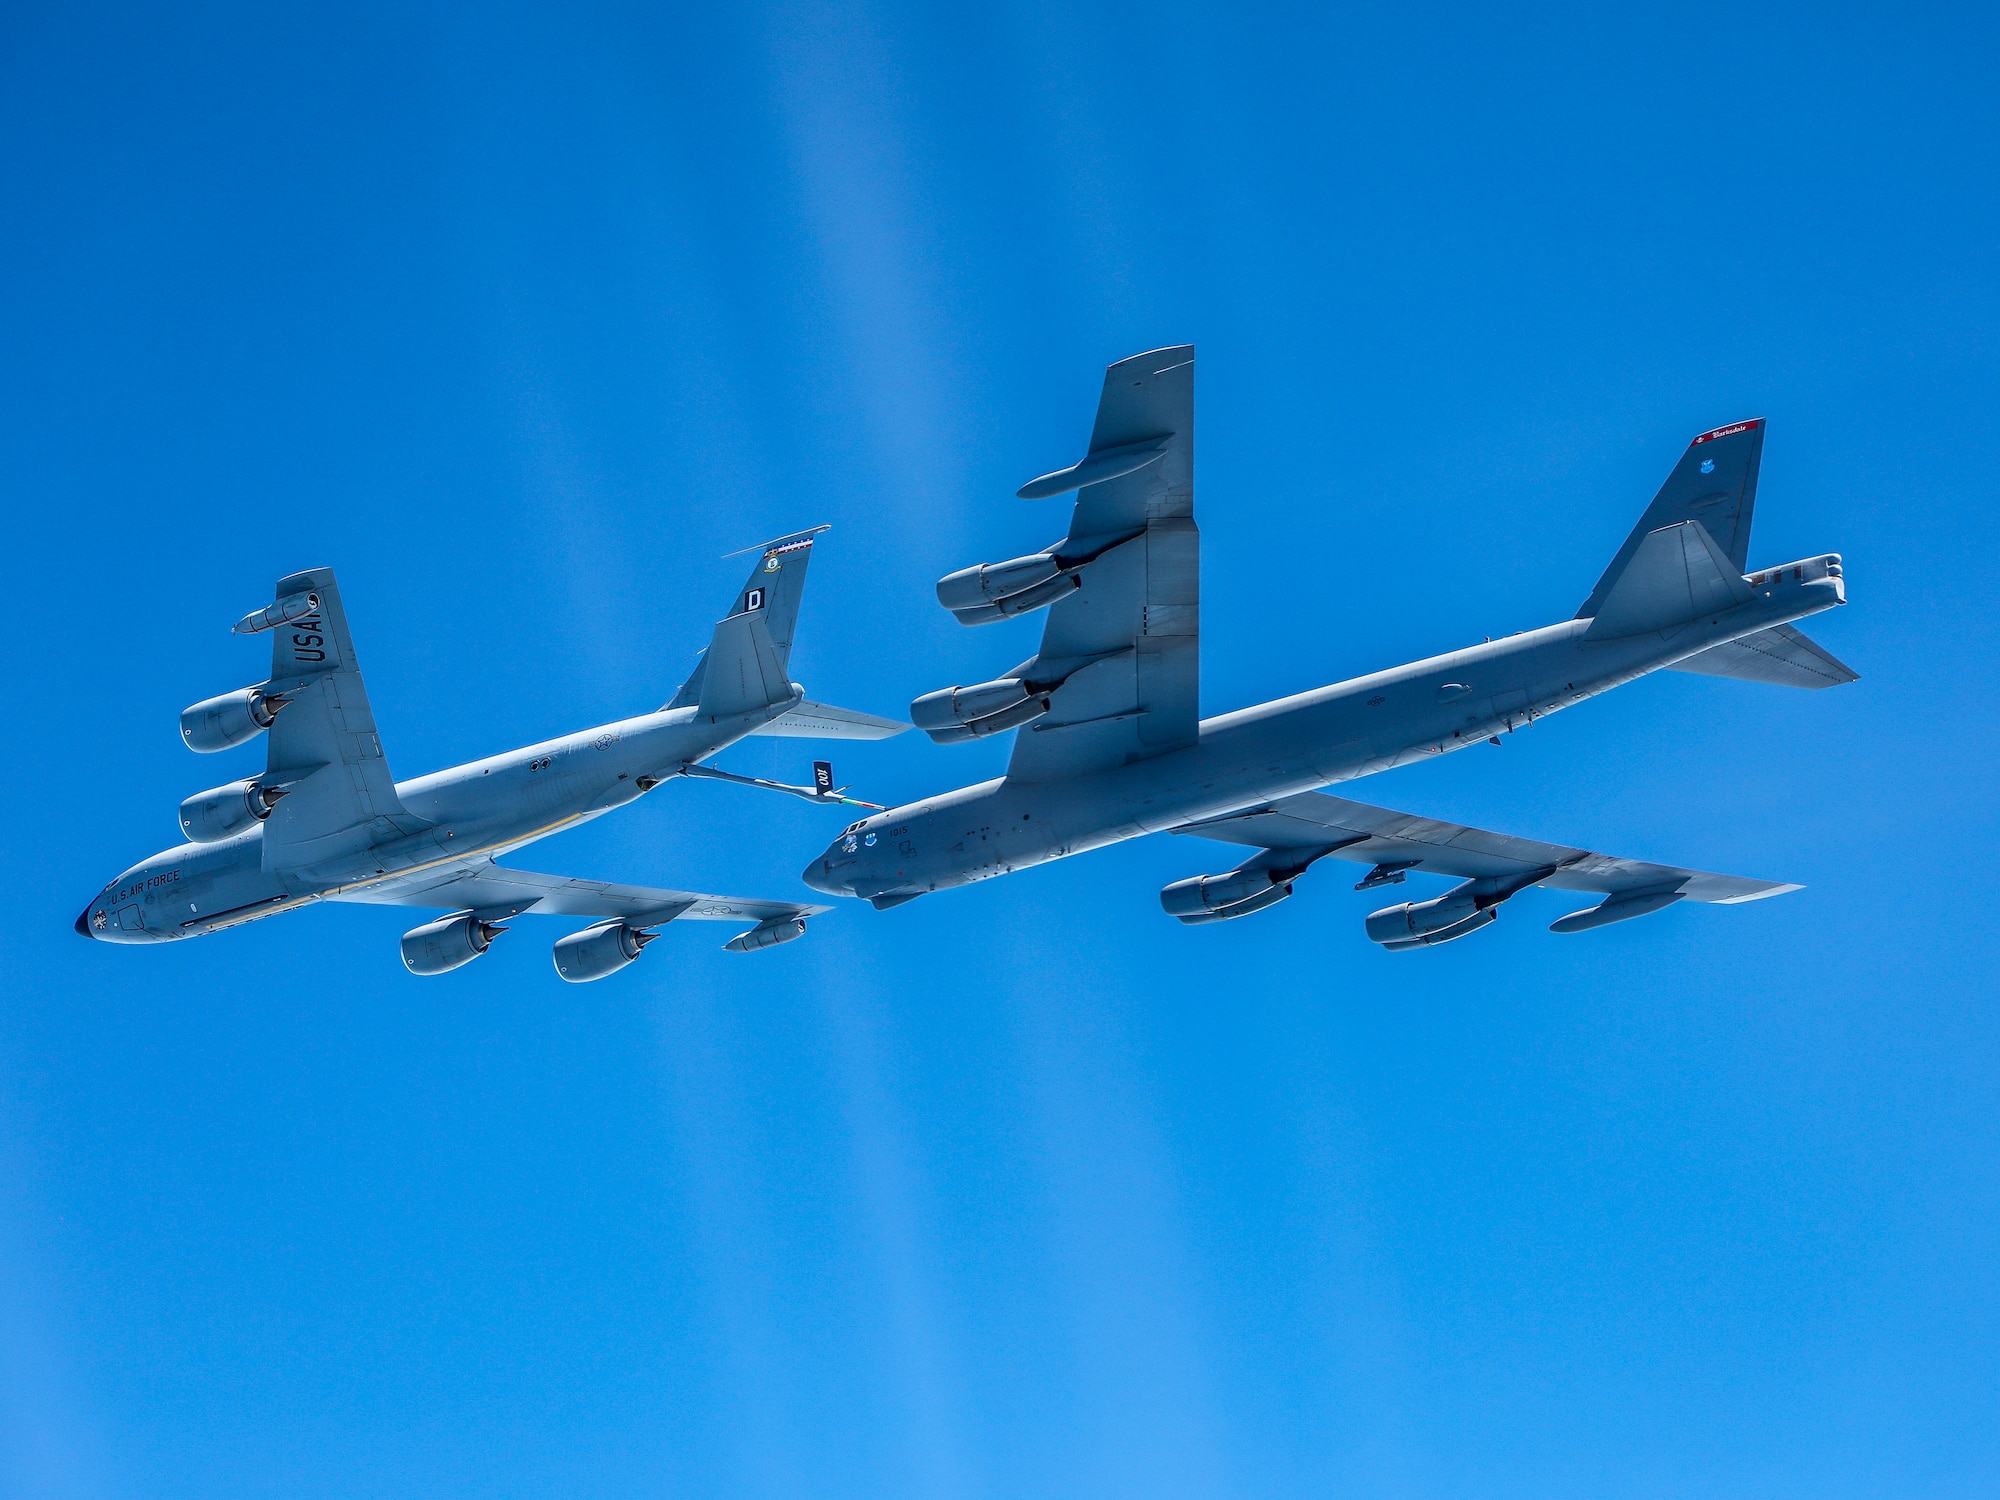 A B-52H Stratofortress operating out of Morón Air Base, Spain, is refueled by a KC-135 Stratotanker assigned to the 100th Air Refueling Wing, RAF Mildenhall, England, during the Bomber Task Force Europe mission Allied Sky, May 31, 2021. Bomber missions demonstrate the credibility of U.S. forces to address a global security environment that is more diverse and uncertain than at any other time in history. (Courtesy photo by the Royal Air Force)